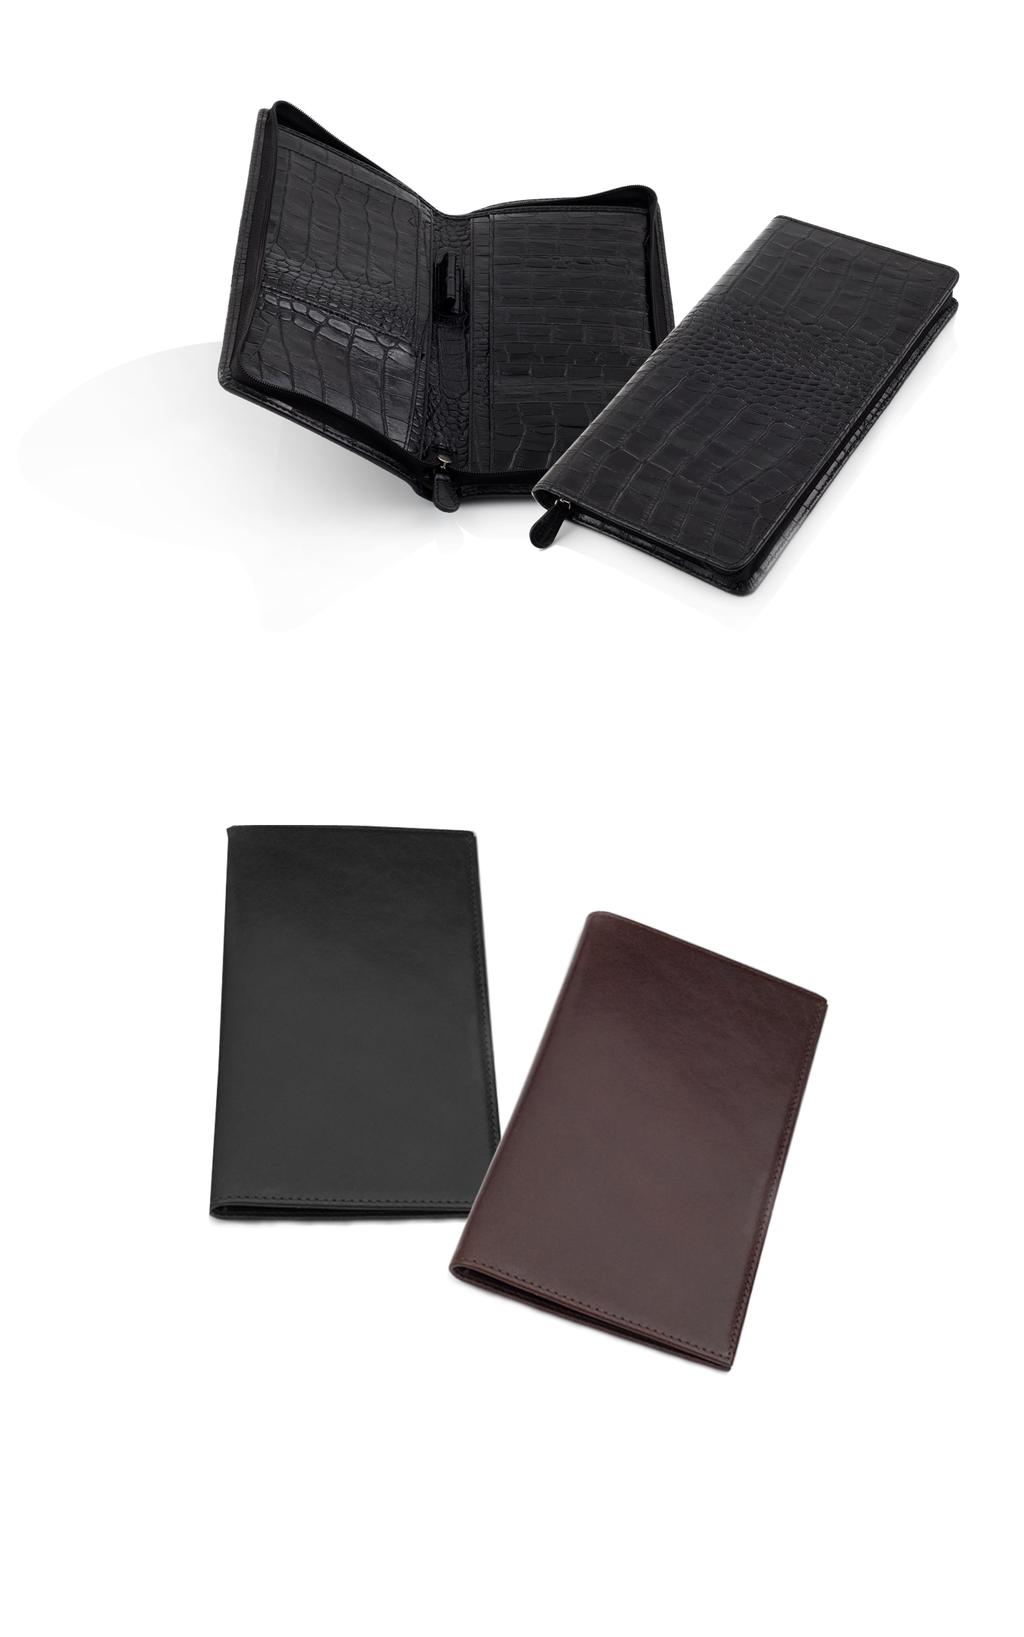 HANDMADE TRAVEL WALLET - Travel and Mock Croc handmade from the finest calf skin.